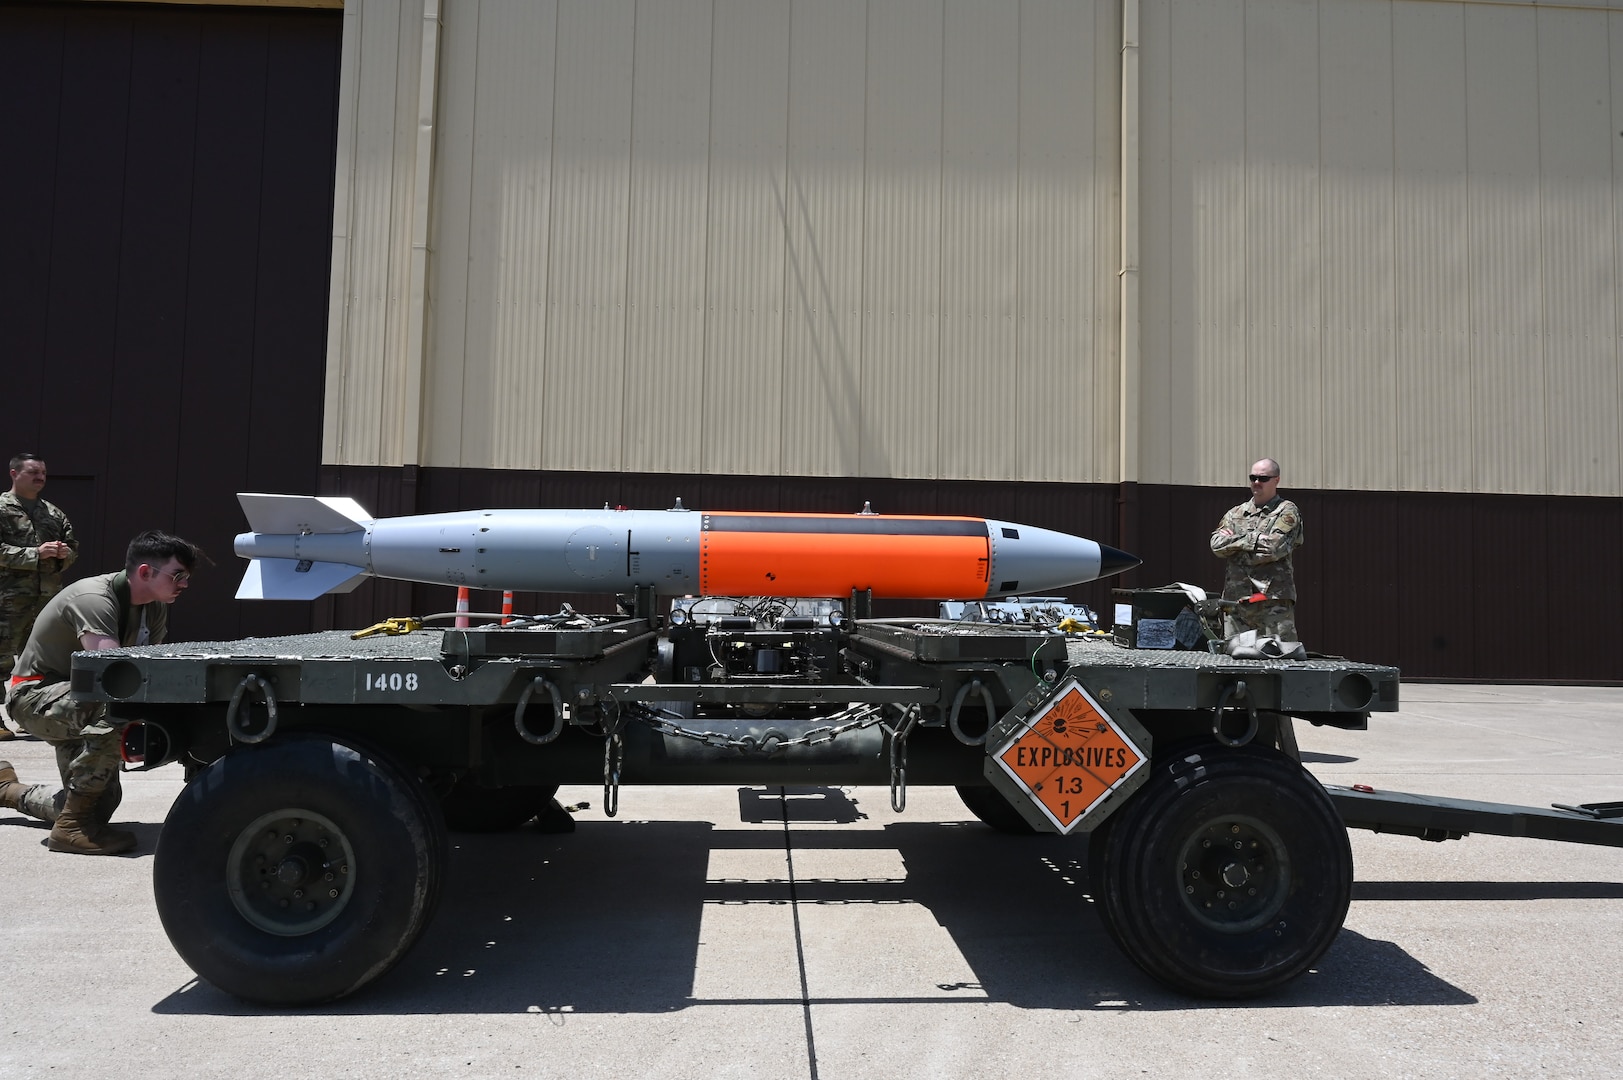 The 72nd Test and Evaluation Squadron test loads a new nuclear-capable weapons delivery system for the B-2 Spirit bomber on June 13, 2022 at Whiteman Air Force Base, Missouri. The 72nd TES conducts testing and evaluation of new equipment, software and weapons systems for the B-2 Spirit Stealth Bomber. (U.S. Air Force photo by Airman 1st Class Devan Halstead)